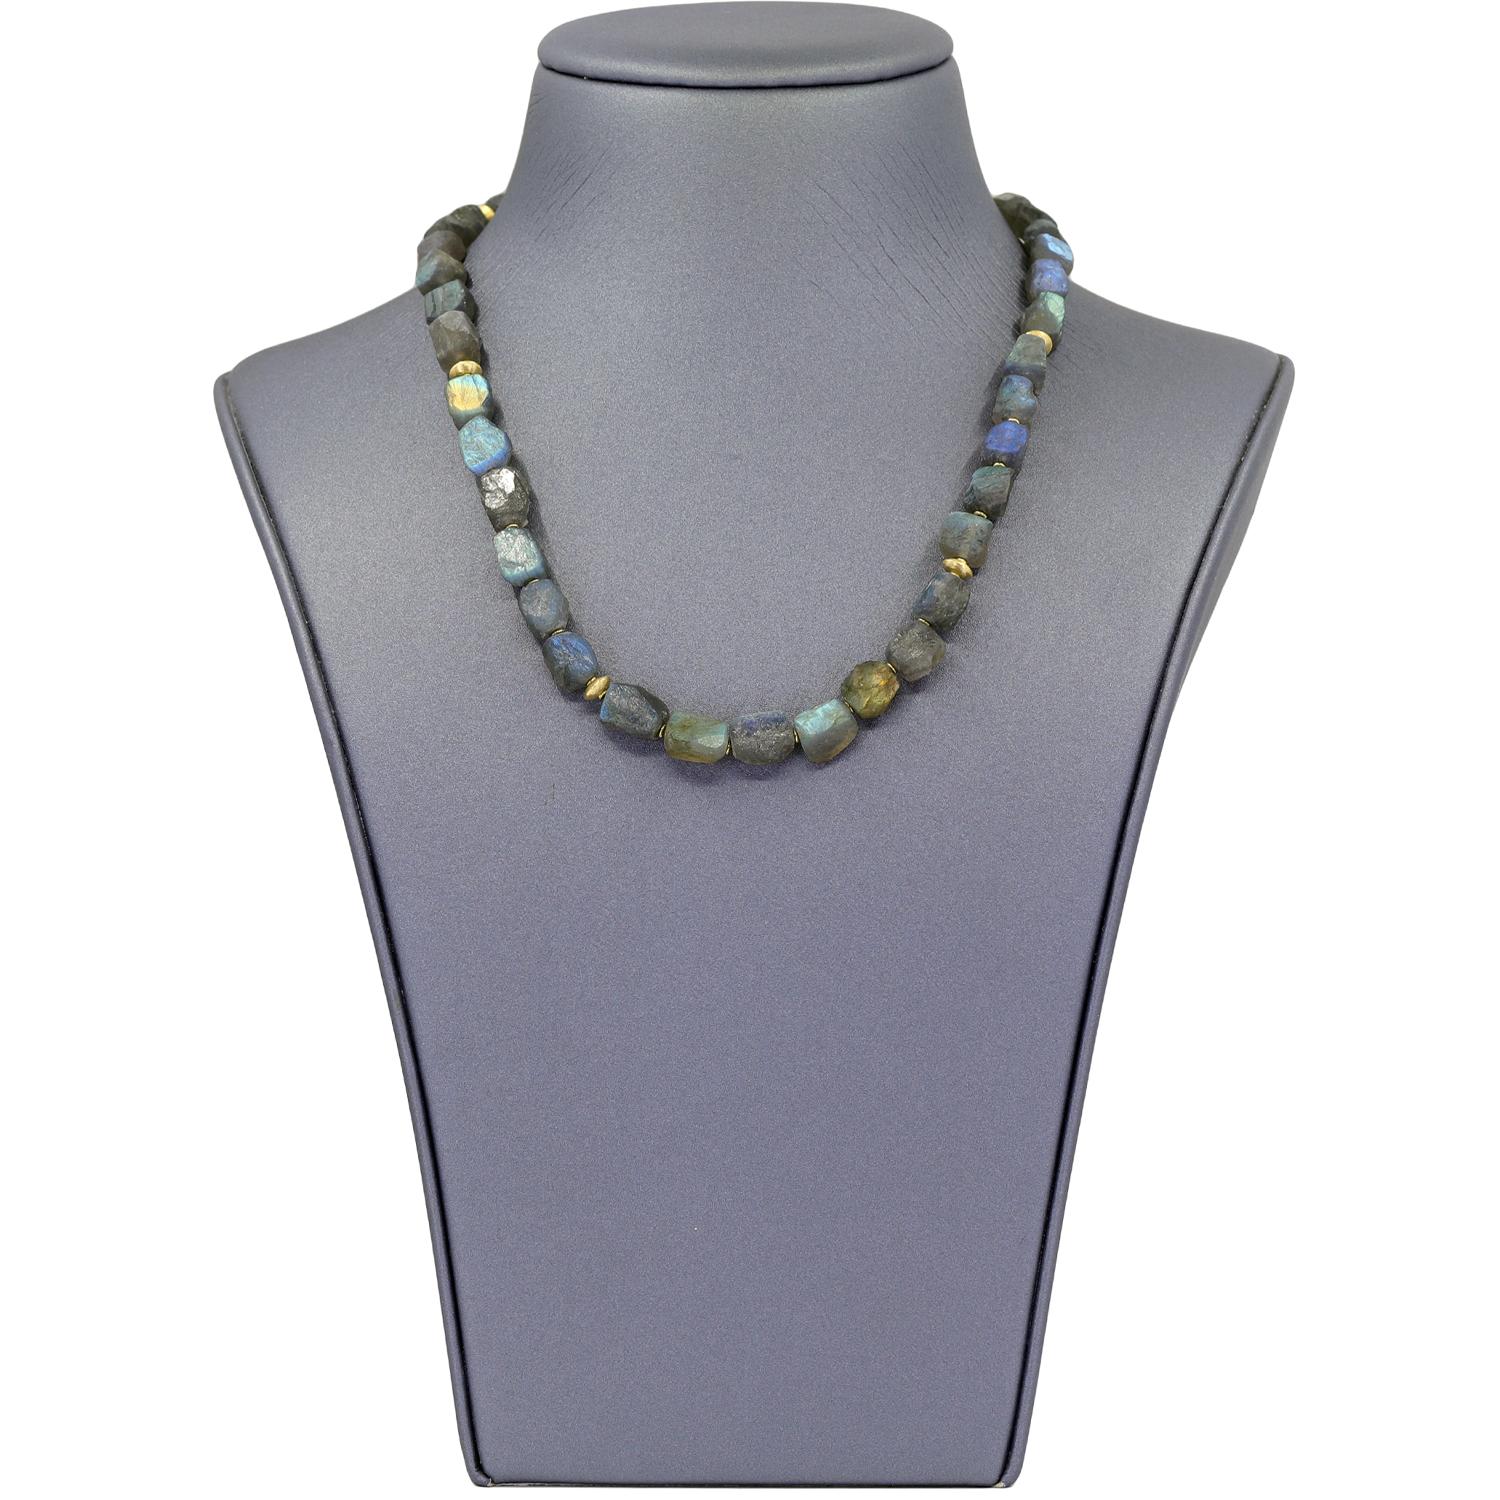 One of a Kind Necklace handcrafted by award winning jewelry maker Barbara Heinrich showcasing a gorgeous strand of chiseled rough labradorite with strong, colorful flash. The gemstones are individually separated by assorted matte-finished 18k yellow